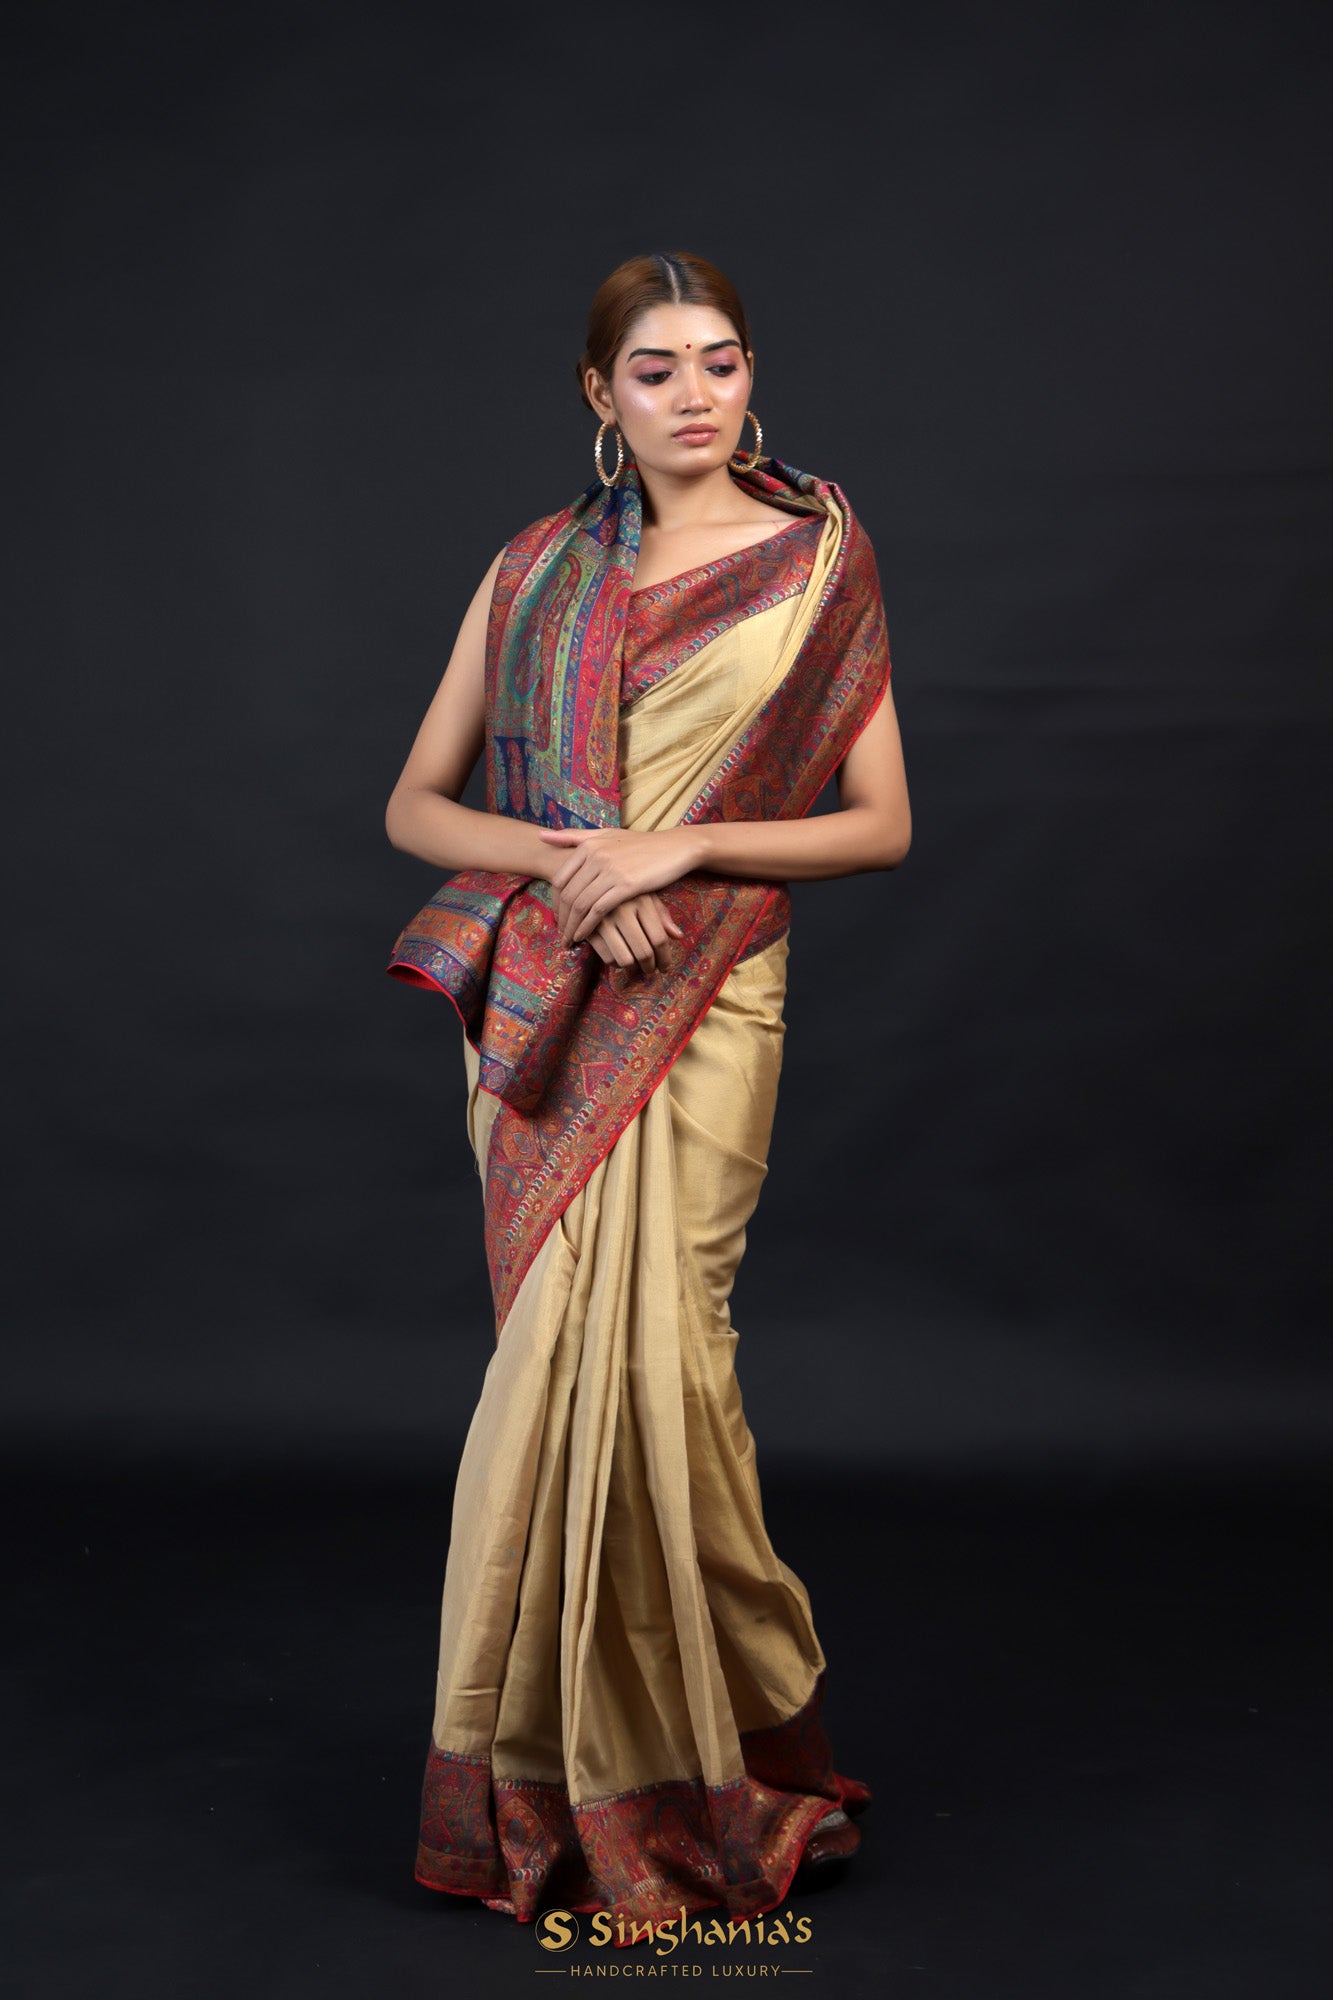 Citrus Brown Kani Silk Saree With Floral Embroidery Border